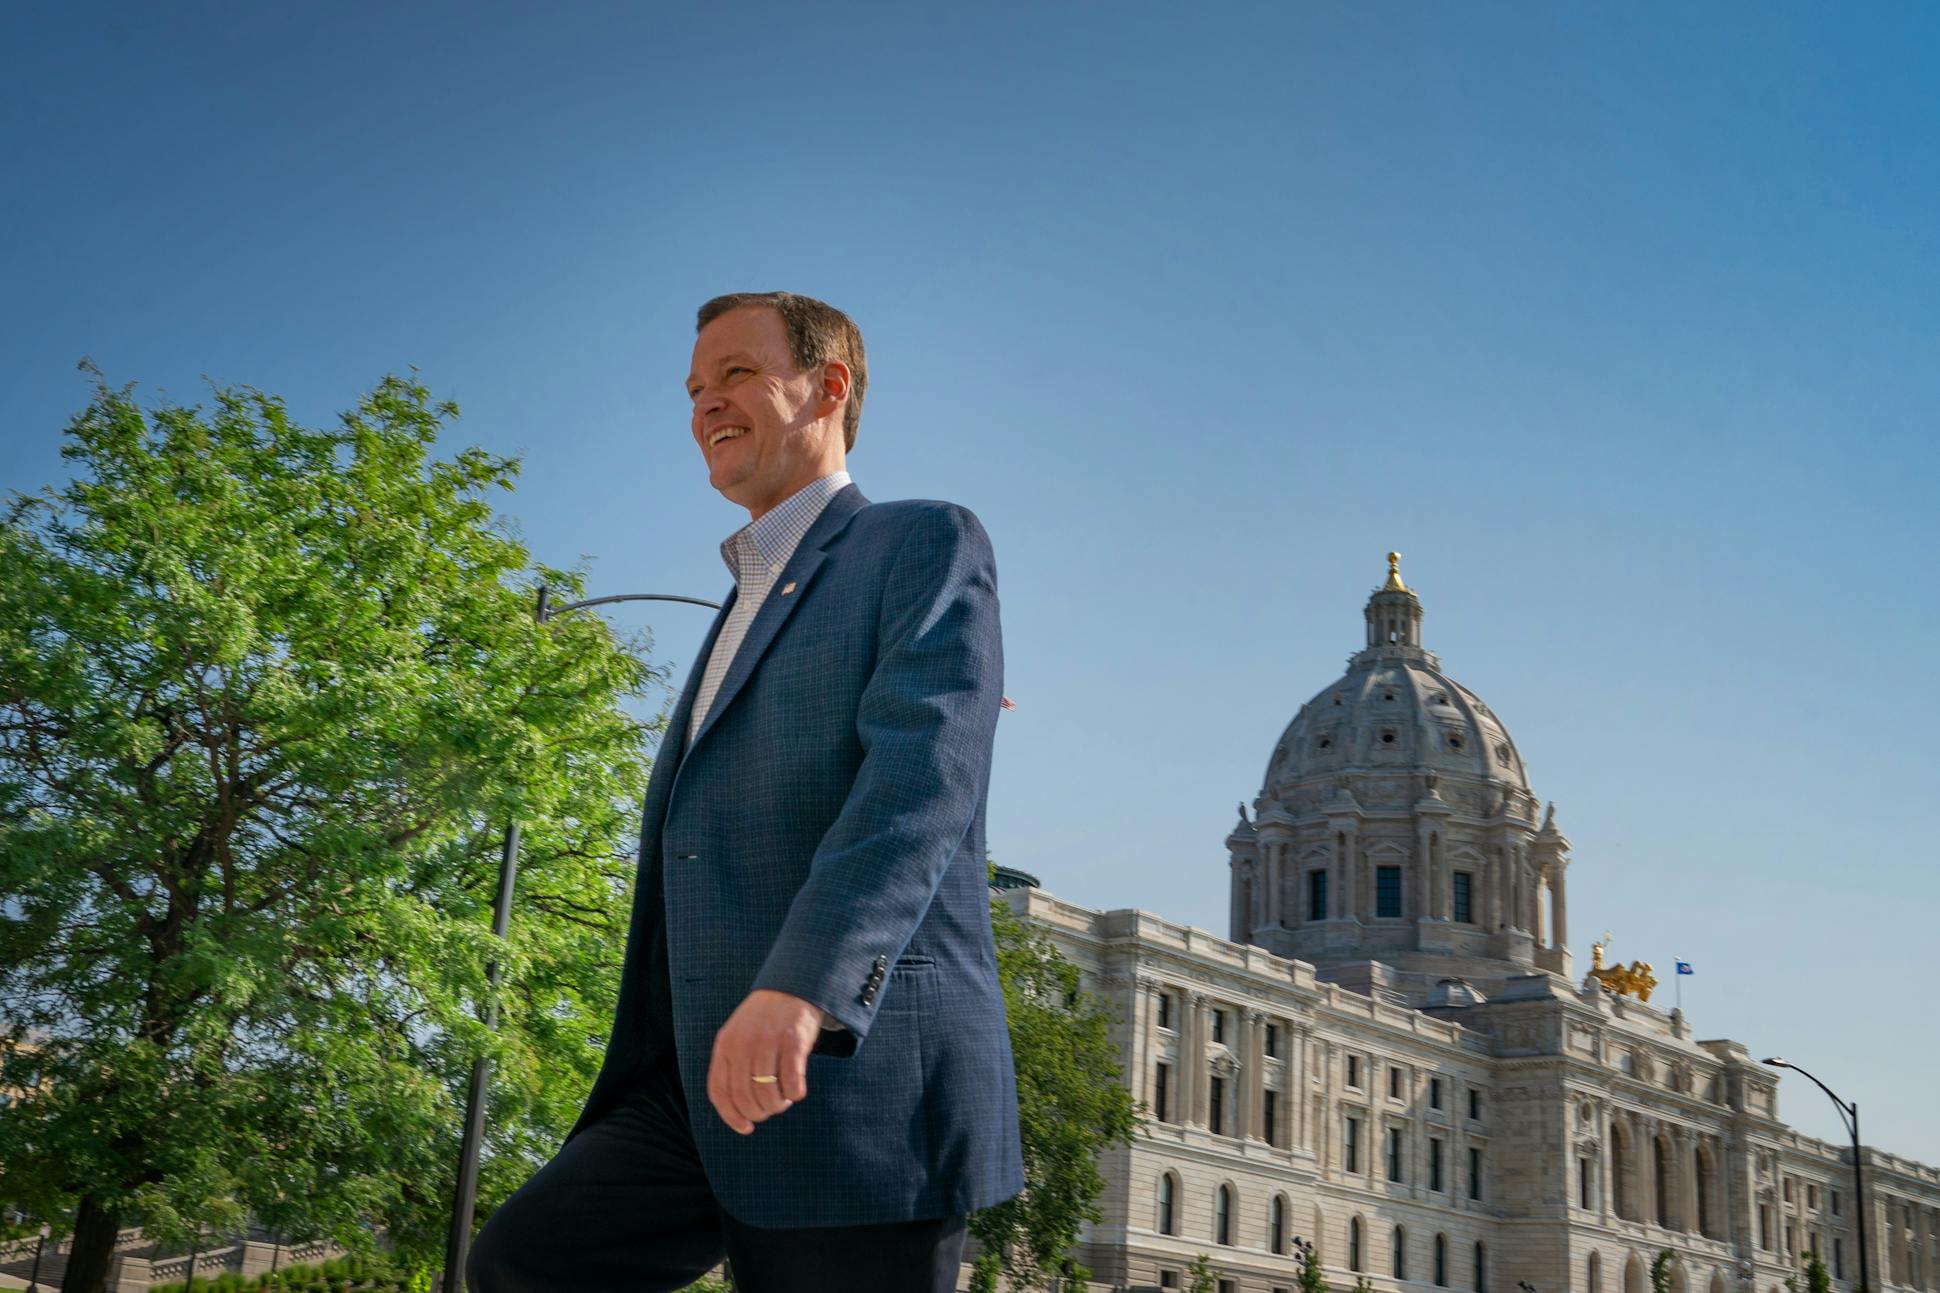 Jeff Johnson climbed the steps of the State Office Building, heading for a press conference after winning his primary election contest against Tim Pawlenty.